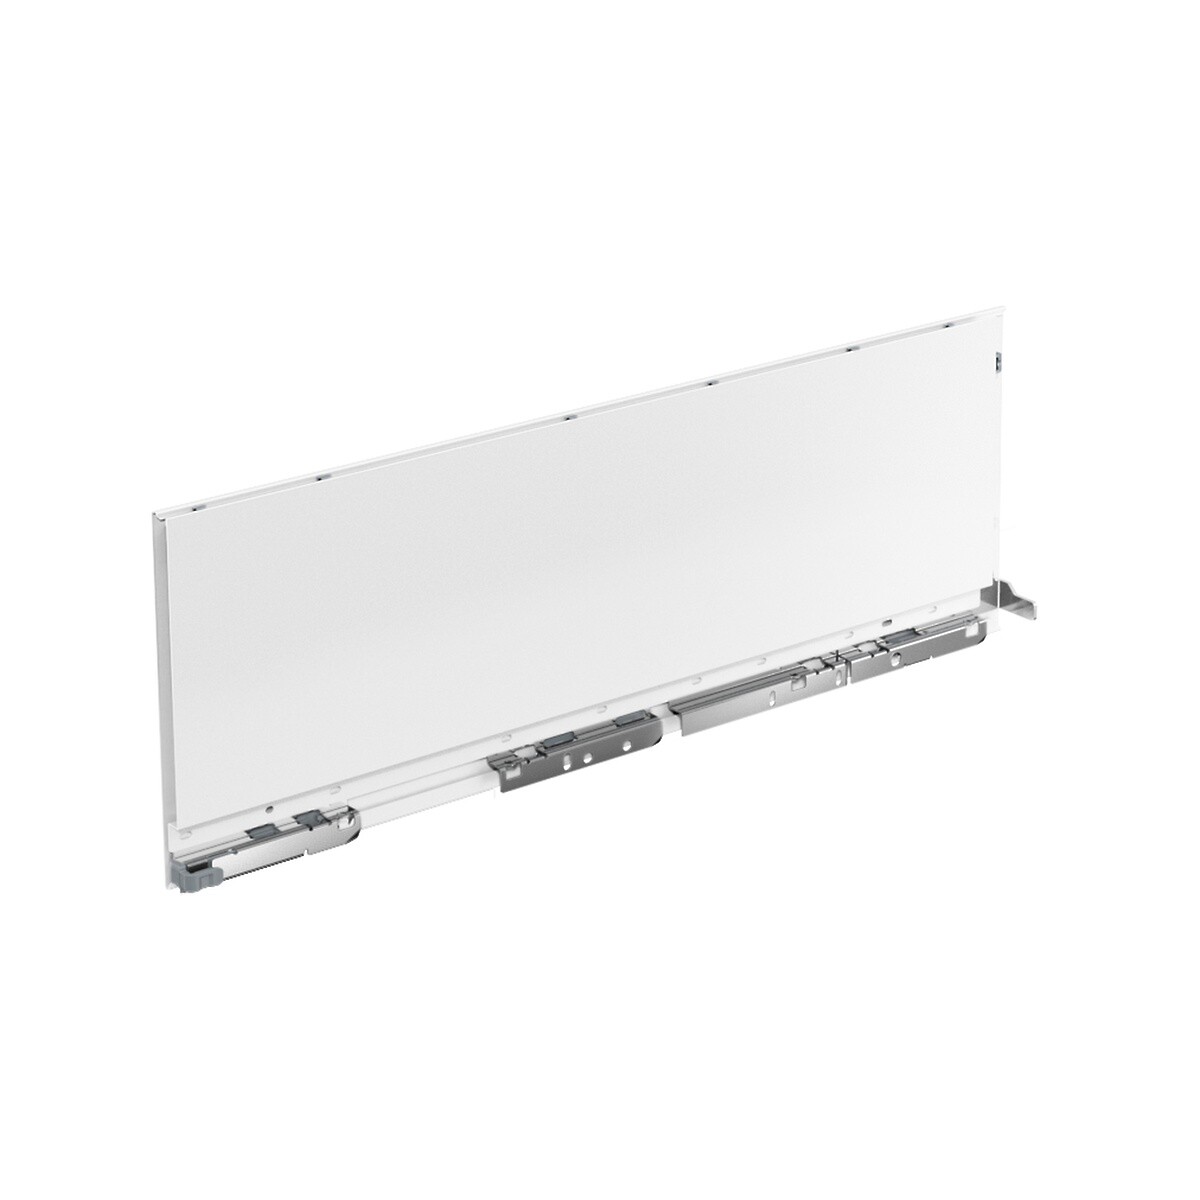 AvanTech YOU Drawer side profile, height 187 mm x NL 270 mm, White, Right